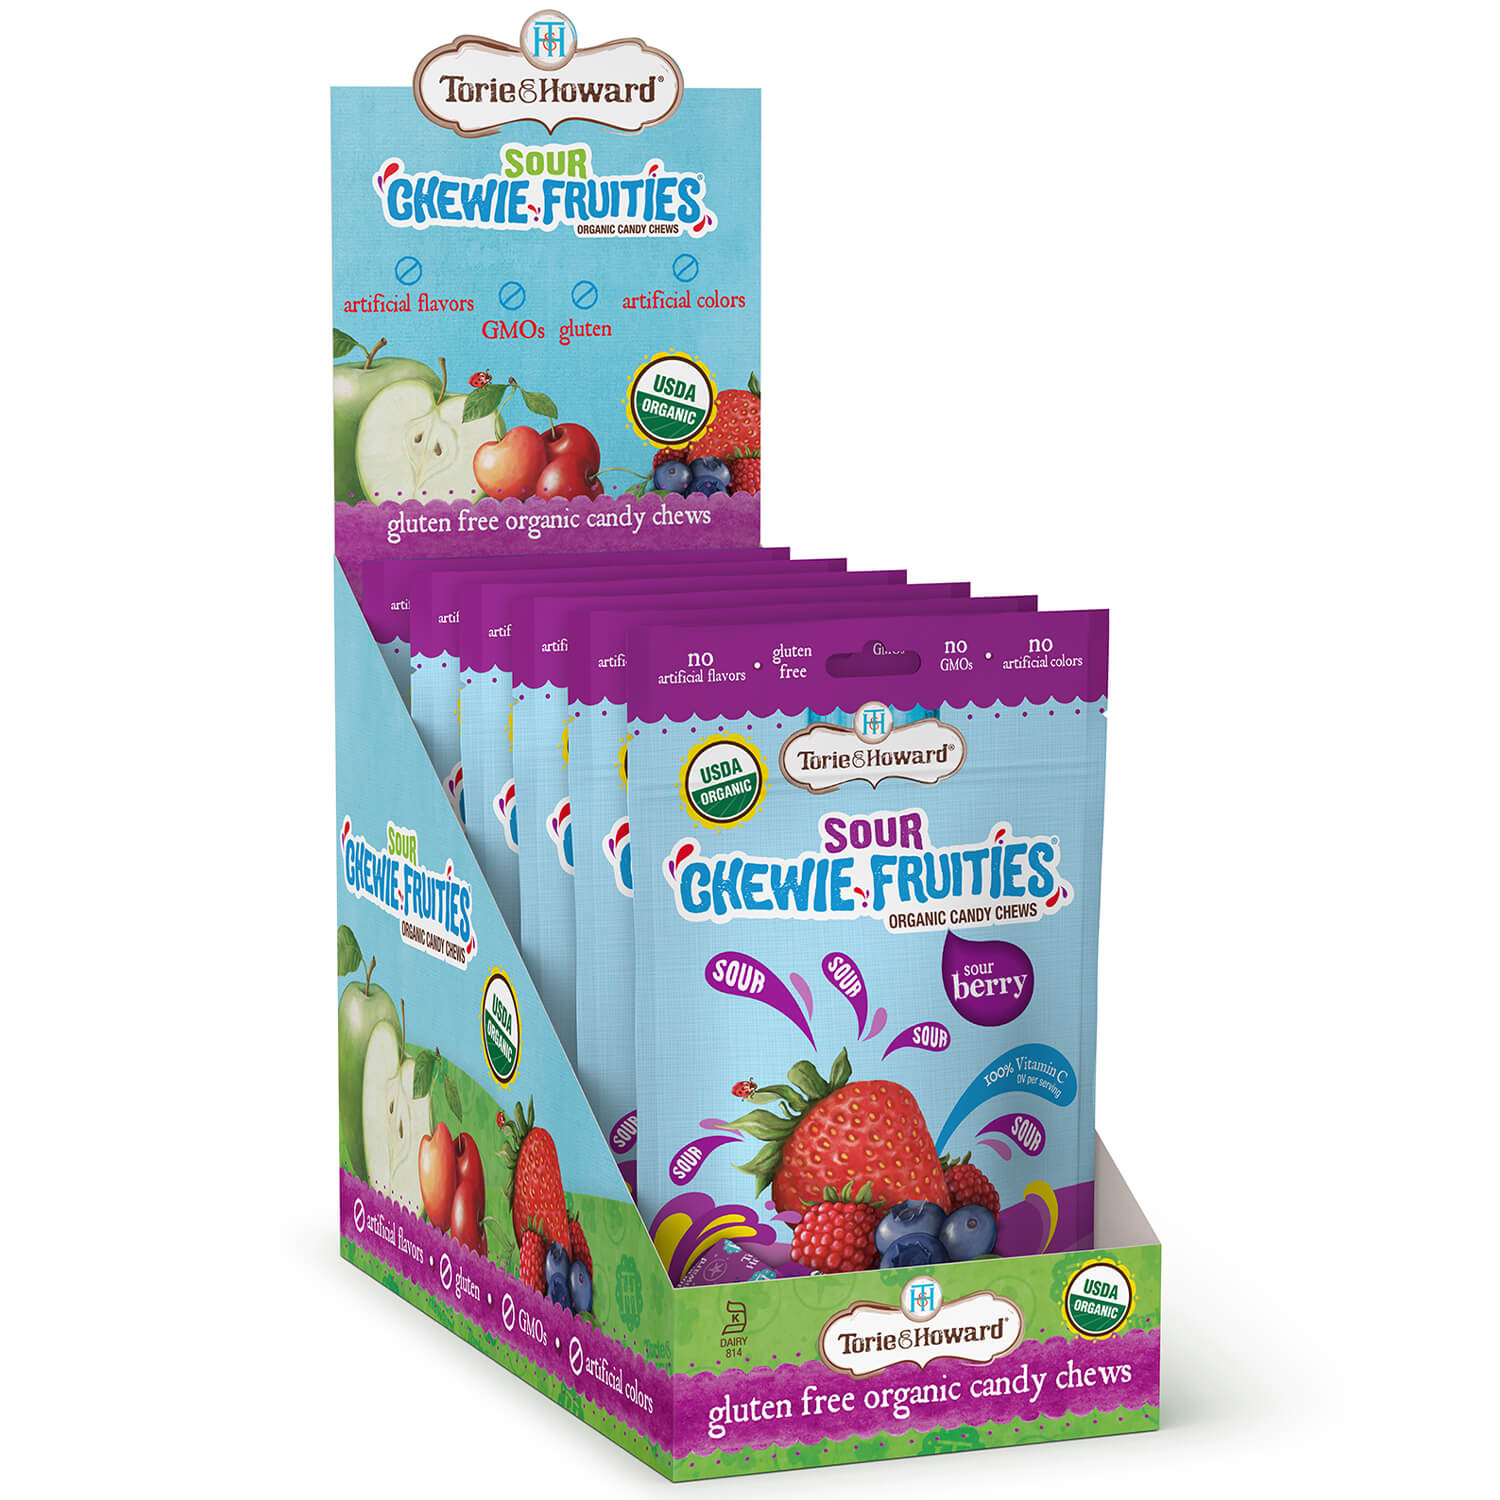 Torie & Howard Sour Chewie Fruities® Organic Candy Sour Berry Flavor 4oz Pack of 6